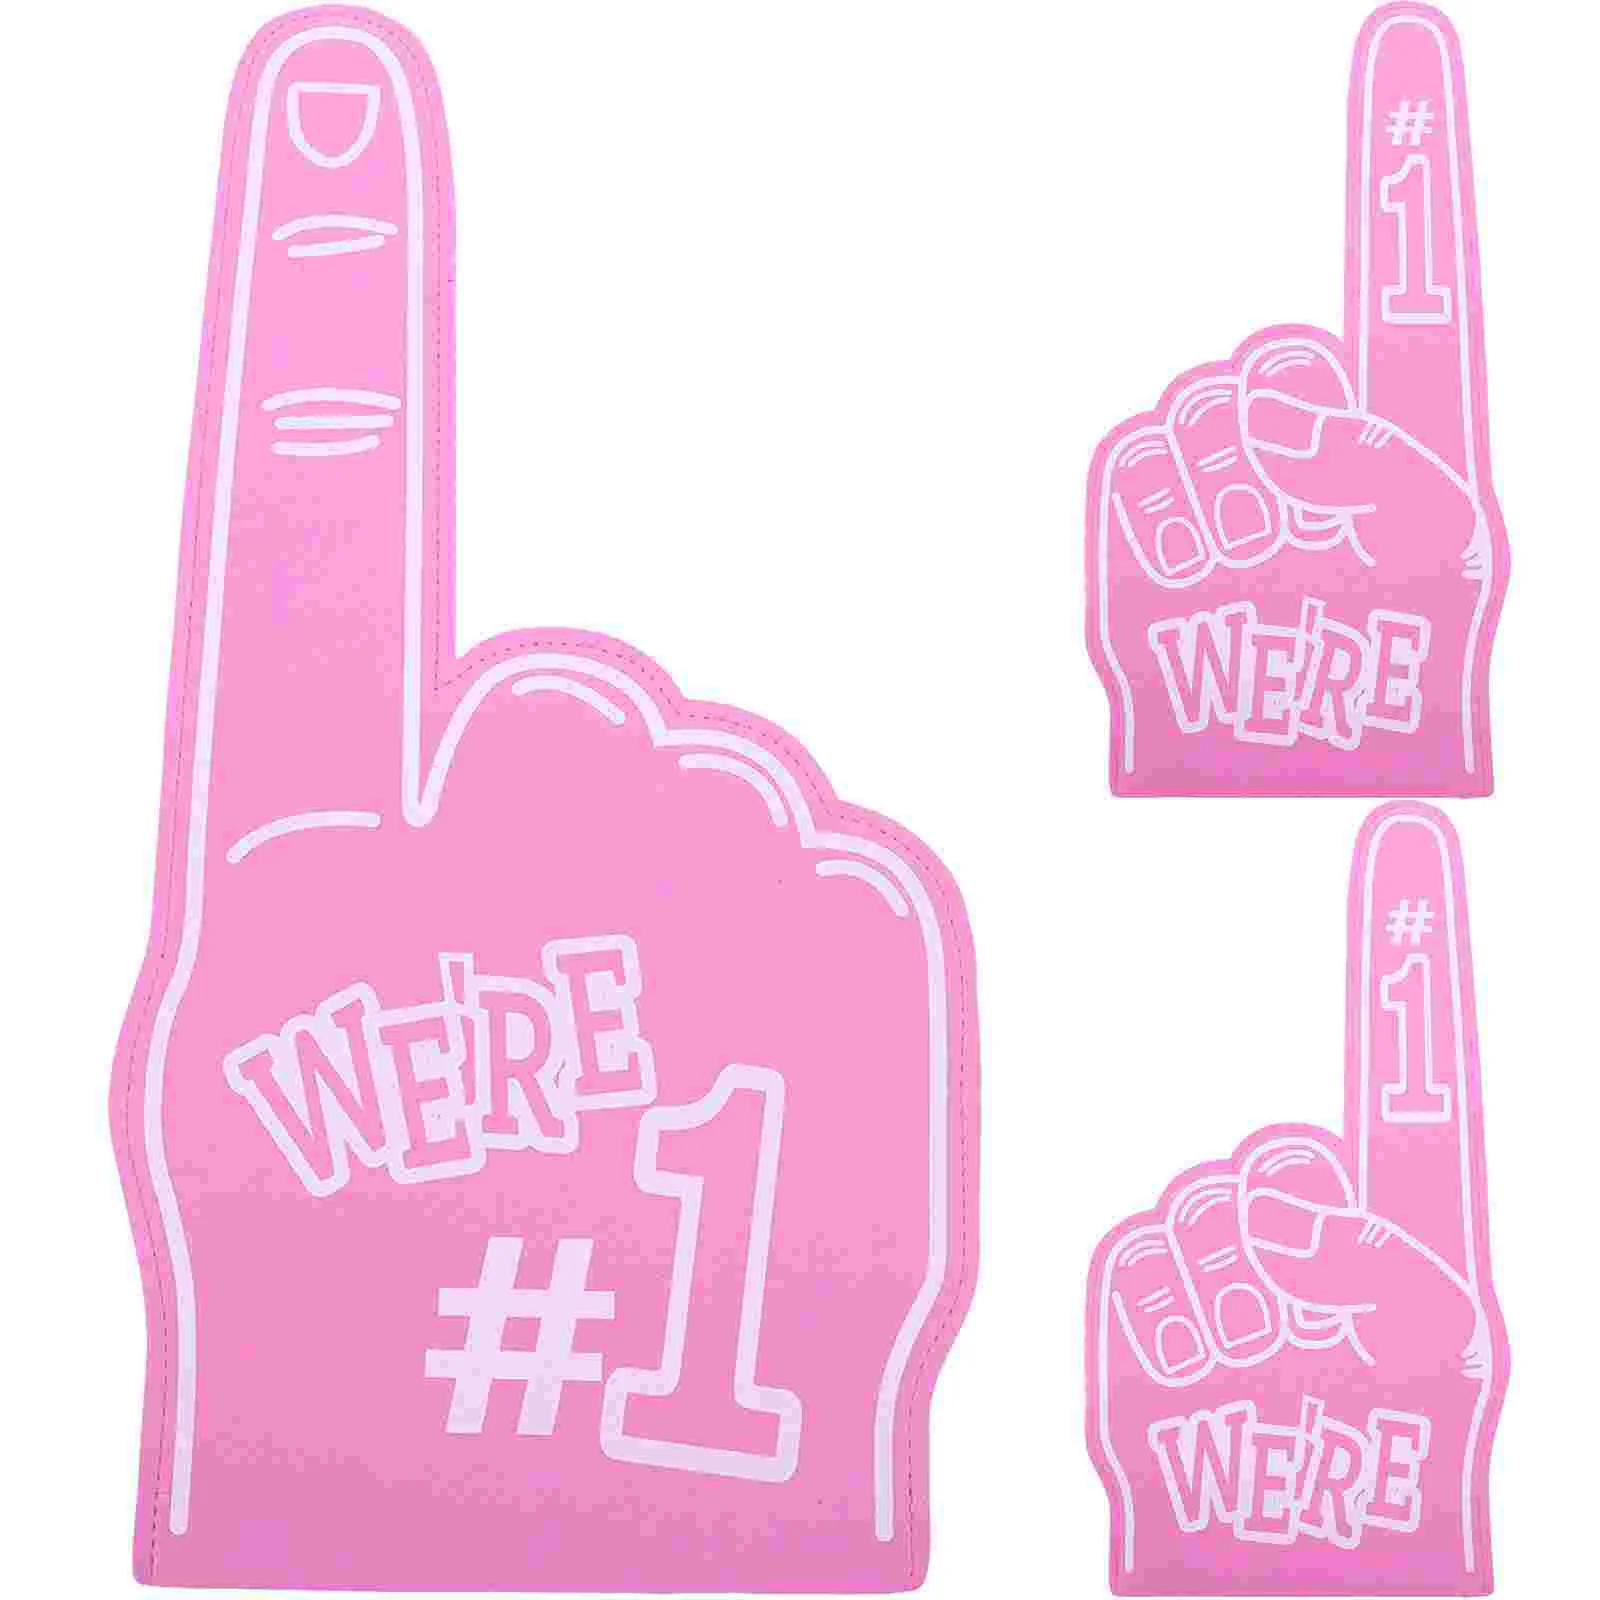 

3 Pcs Cheering Clapper Foam Hand Giant Hands Kids Sports Toys Decorate Party Favors Finger Fingers Eva Pointer Child Number